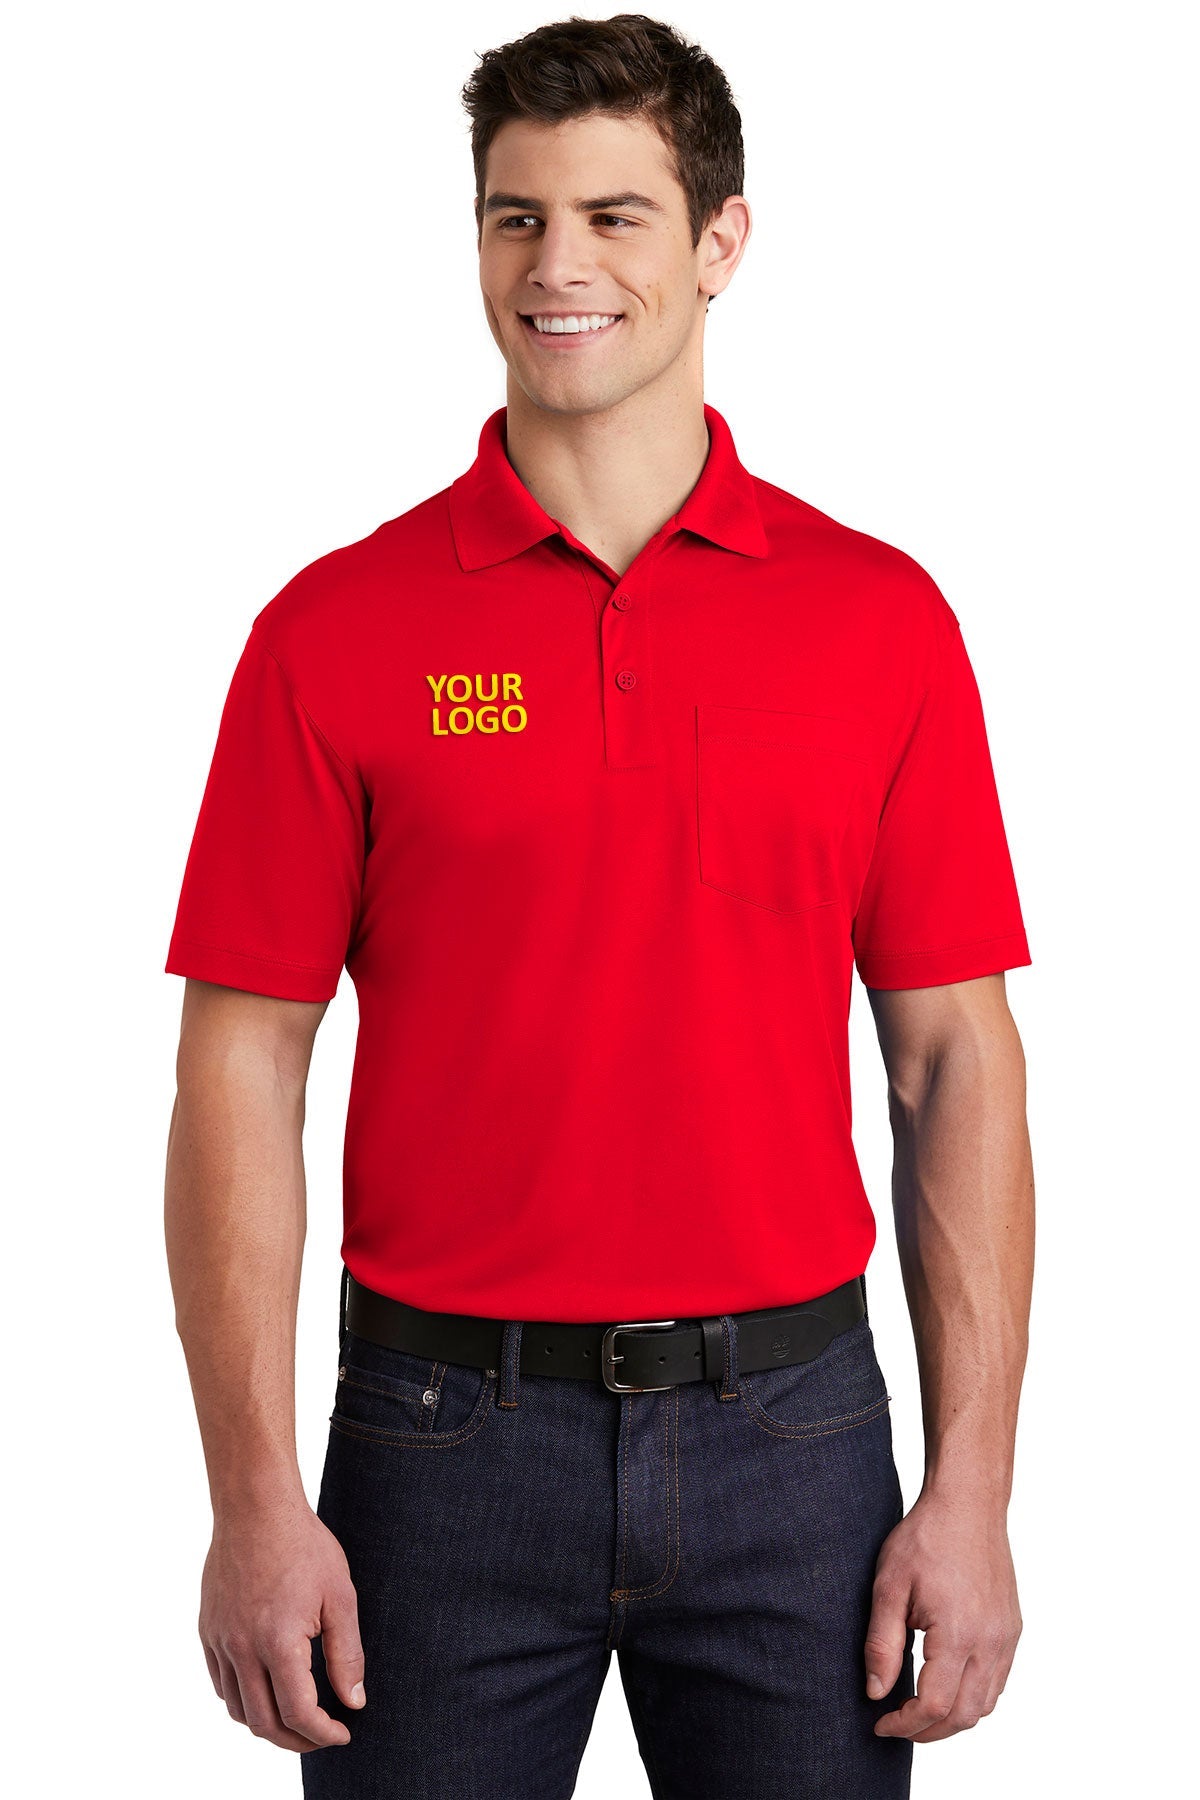 Sport-Tek True Red ST651 polo shirts with logos